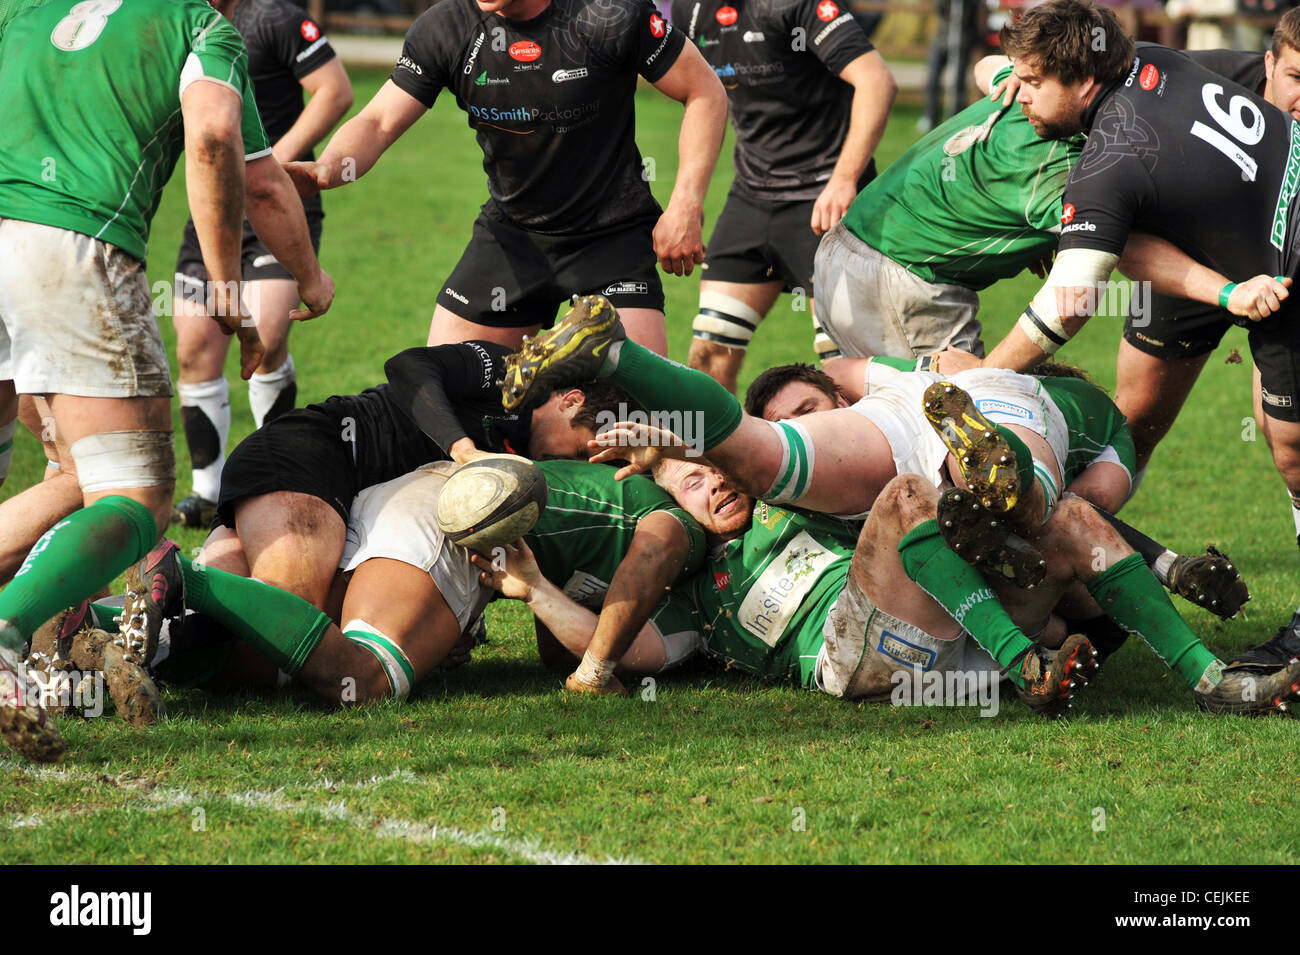 Rugby game, Wharfedale Rugby Union Football Club, North Yorkshire UK Stock Photo